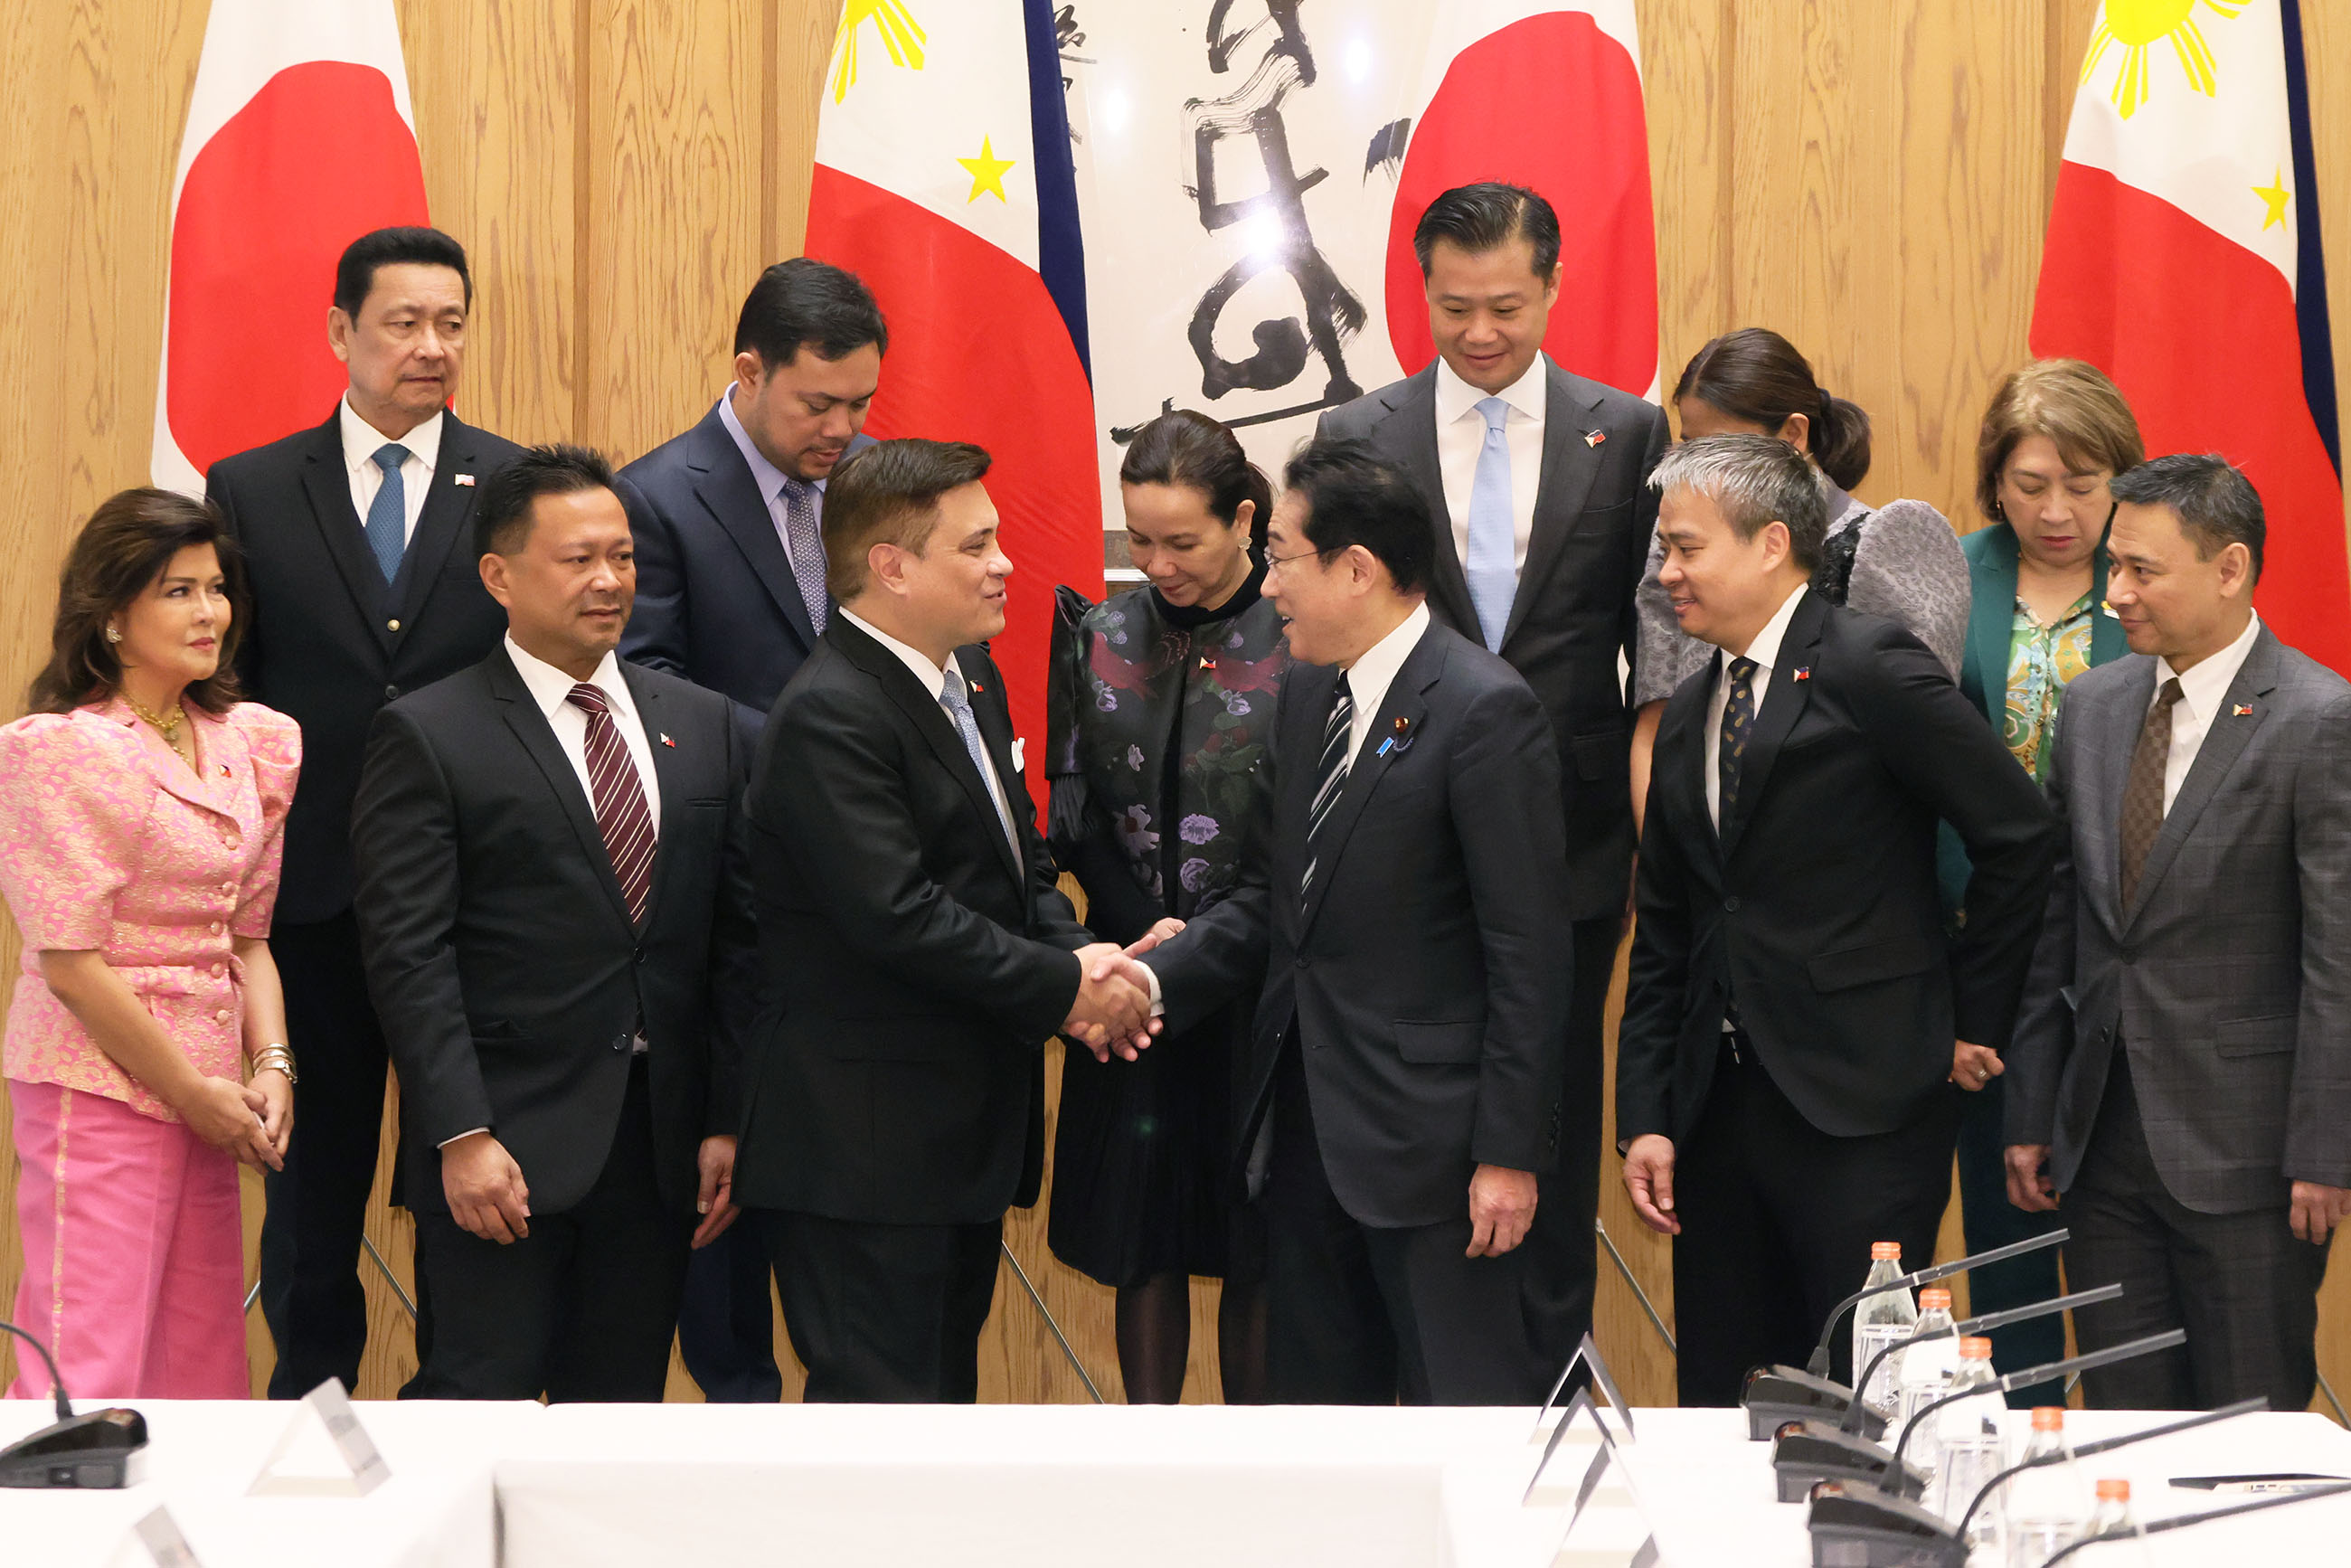 Courtesy Call from a Delegation Led by Senate President Zubiri of the Republic of the Philippines